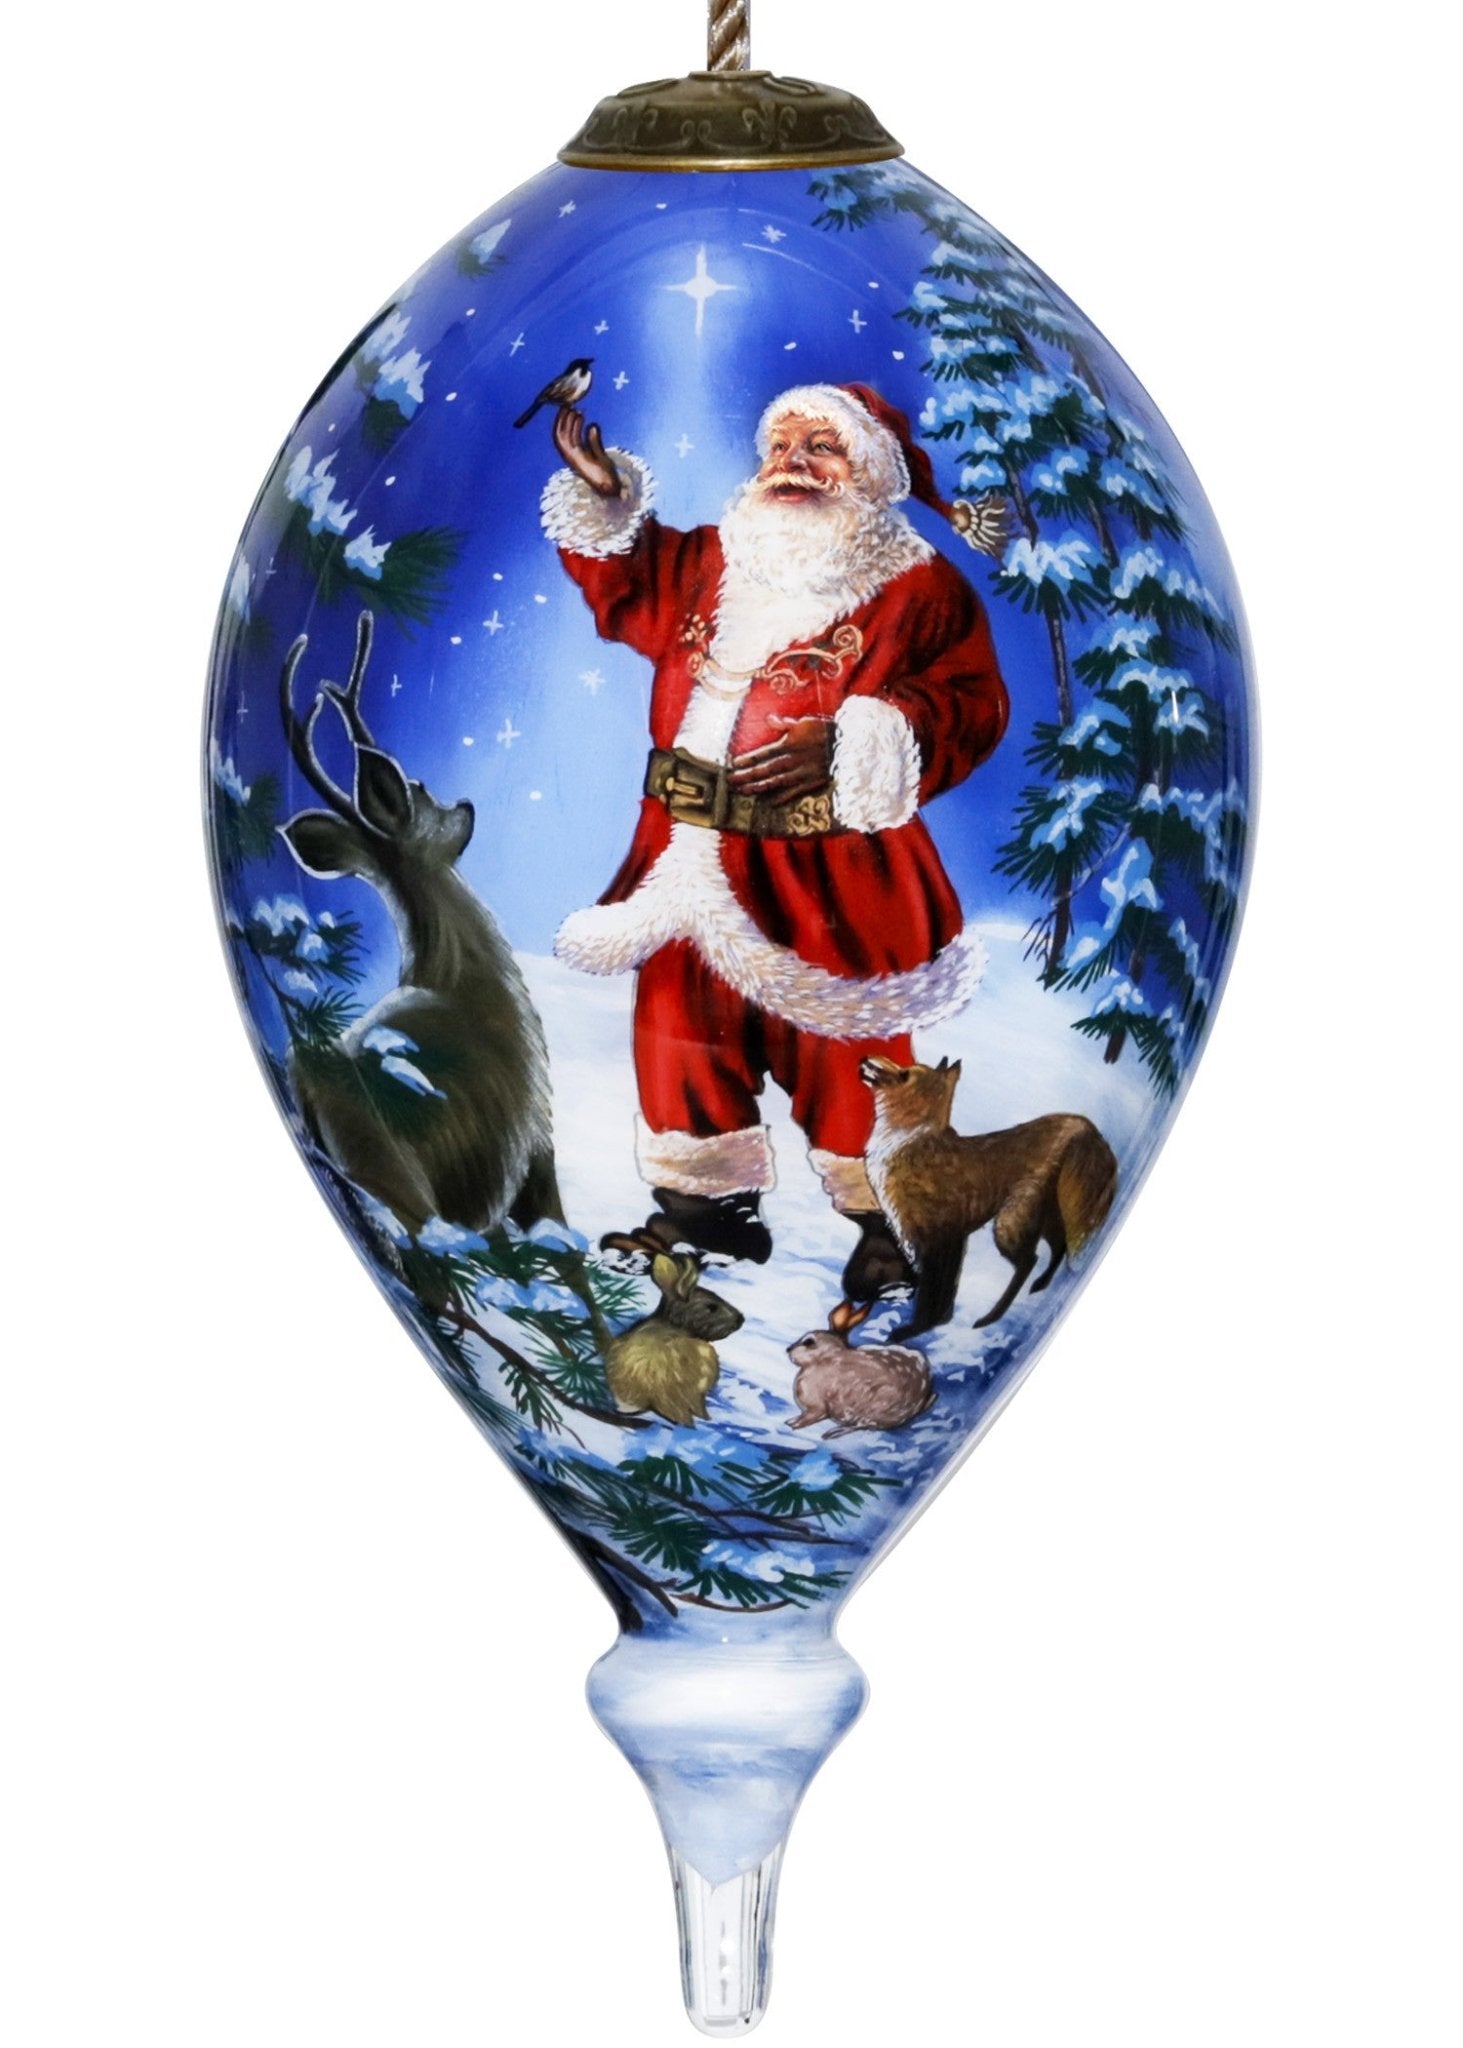 Starry-Heaven-and-Santa-Hand-Painted-Mouth-Blown-Glass-Ornament-Christmas-Ornaments